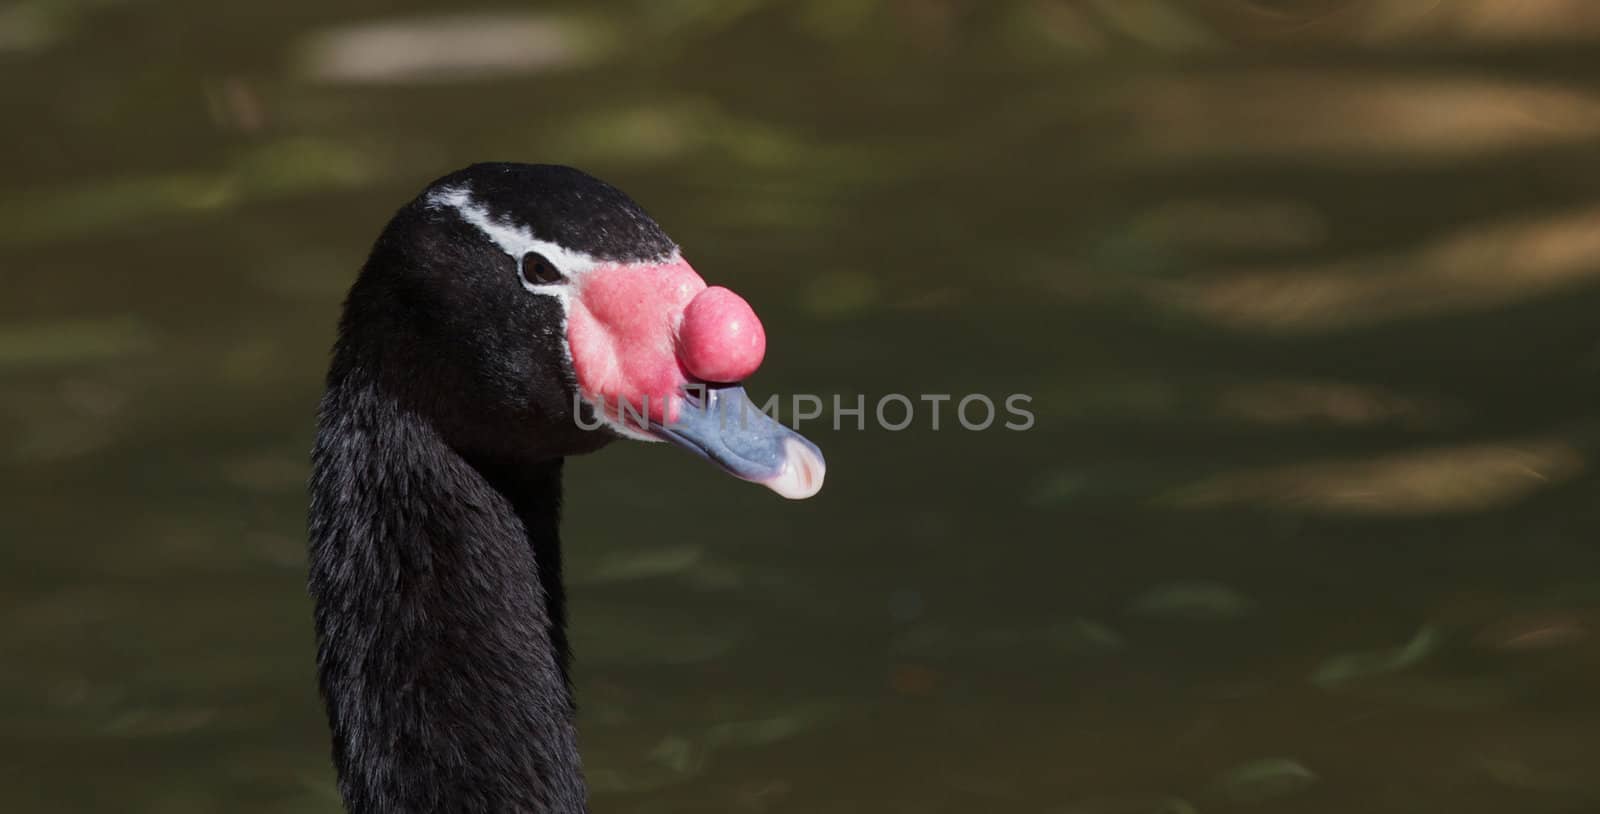 Close up of the head and neck of a black neck swan with a green pond background

